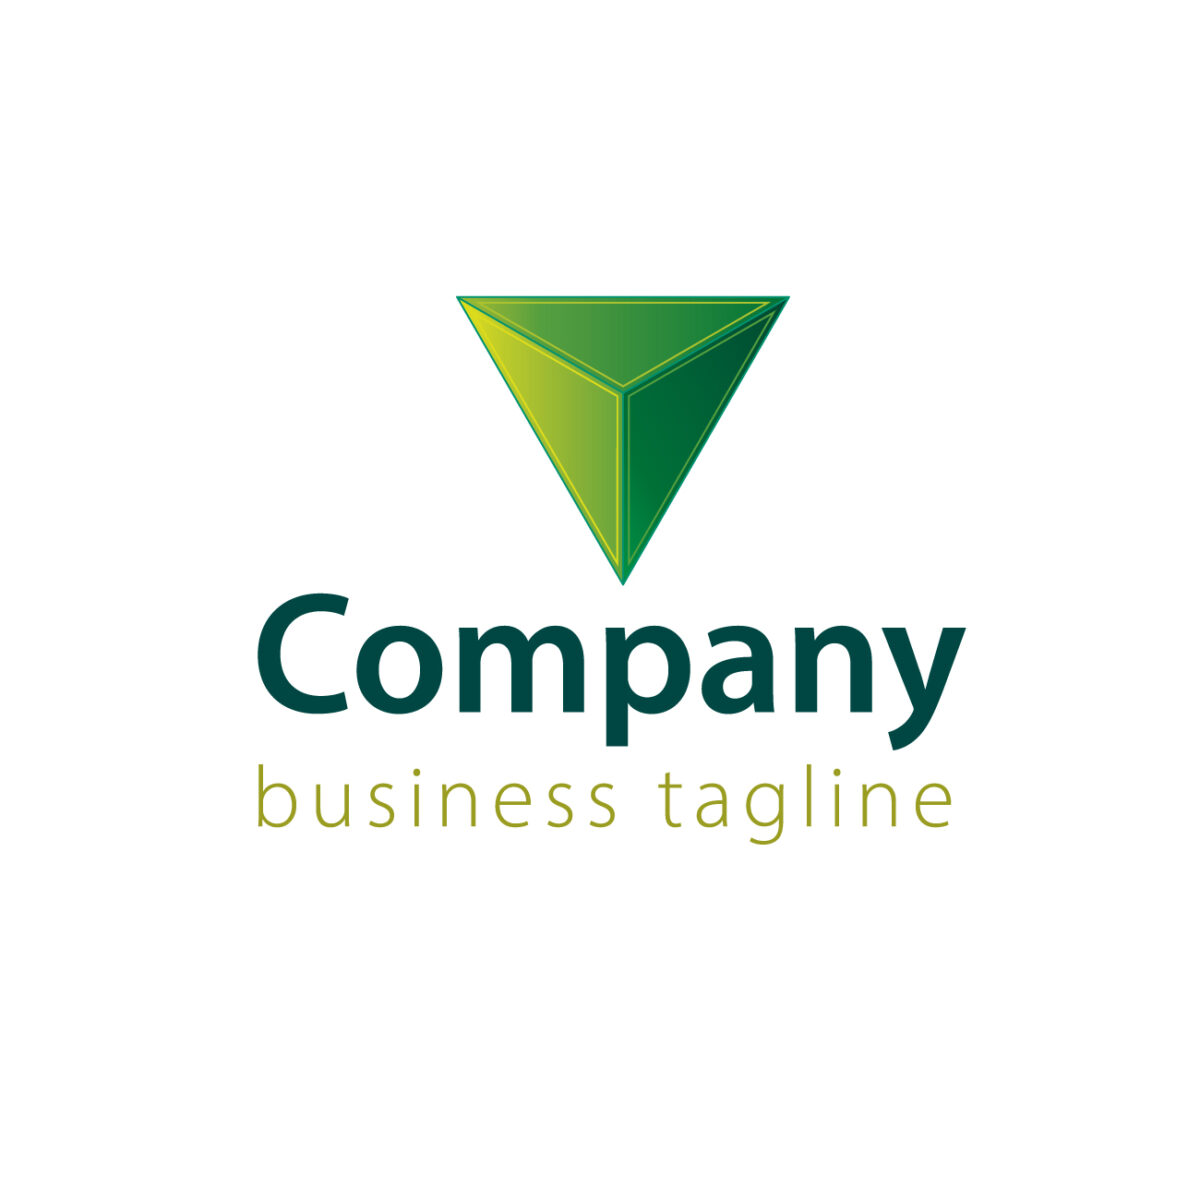 Company Logo Design: Building a Strong Corporate Identity